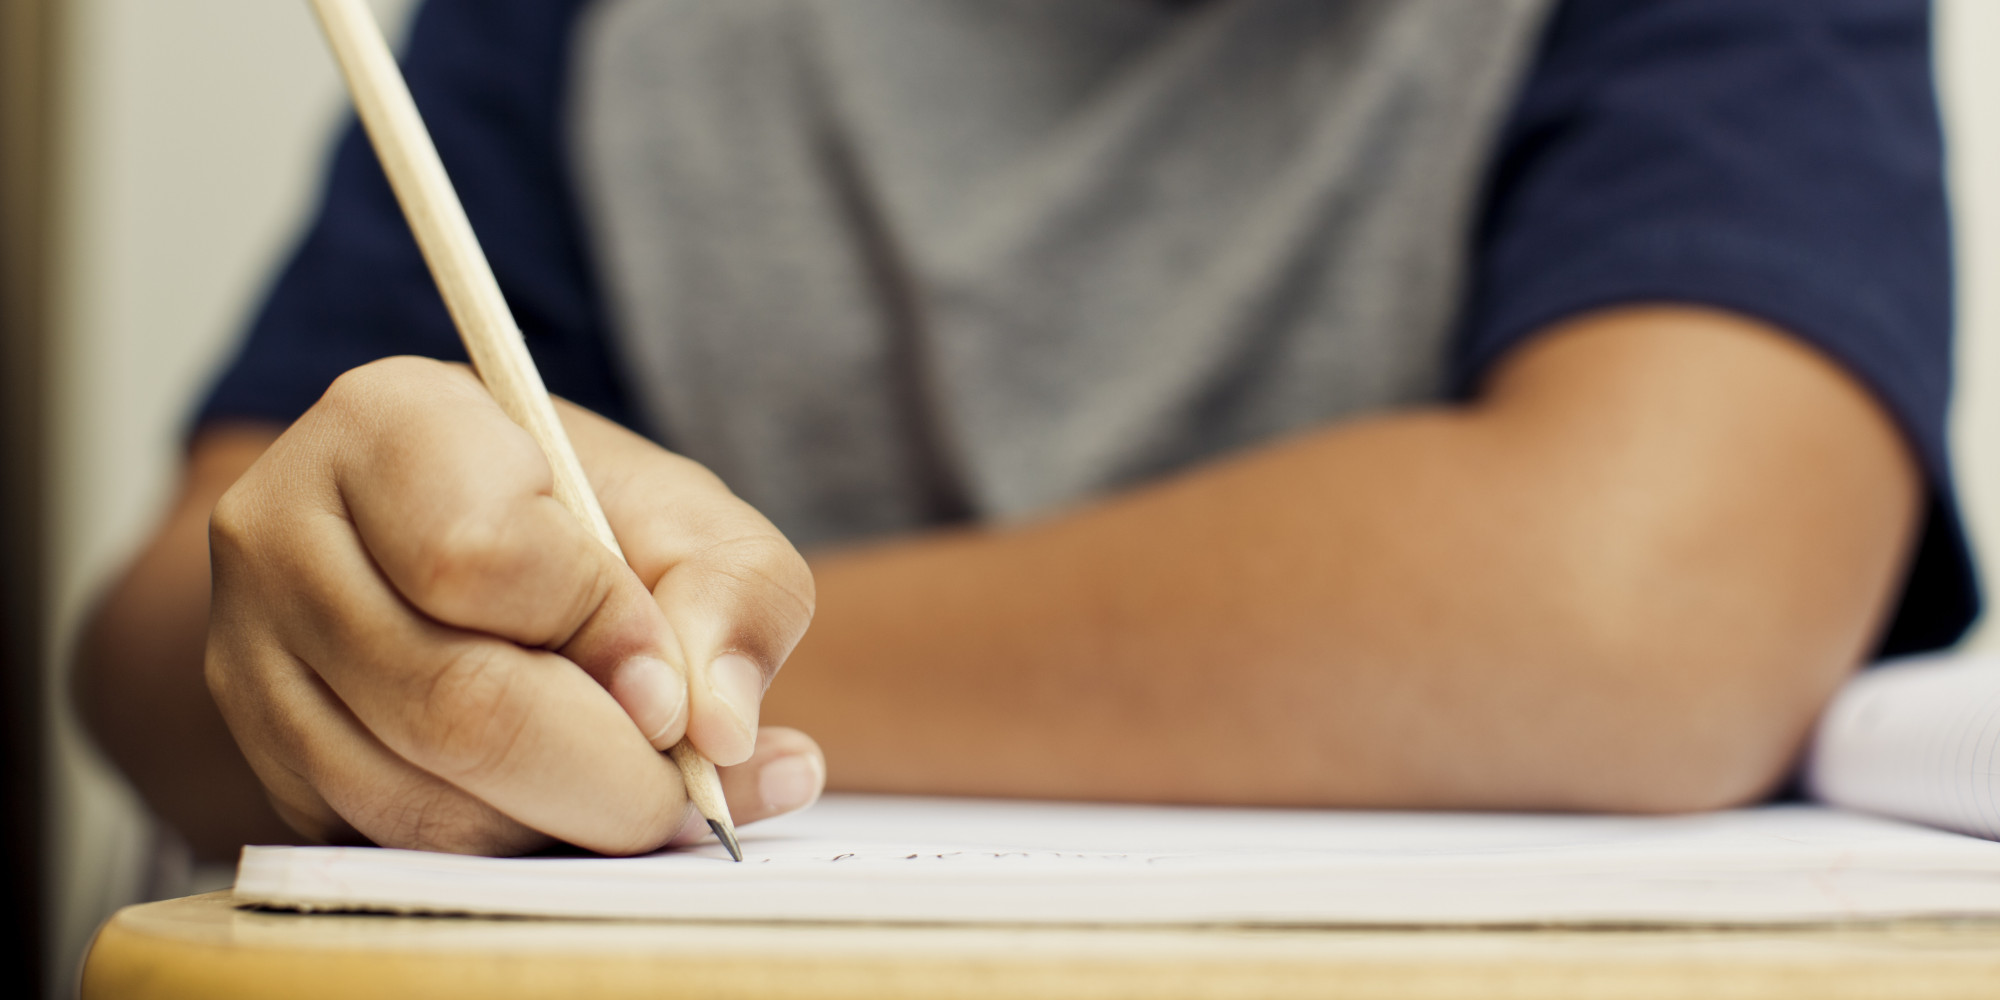 Here are Top 7 Exam Management Tips